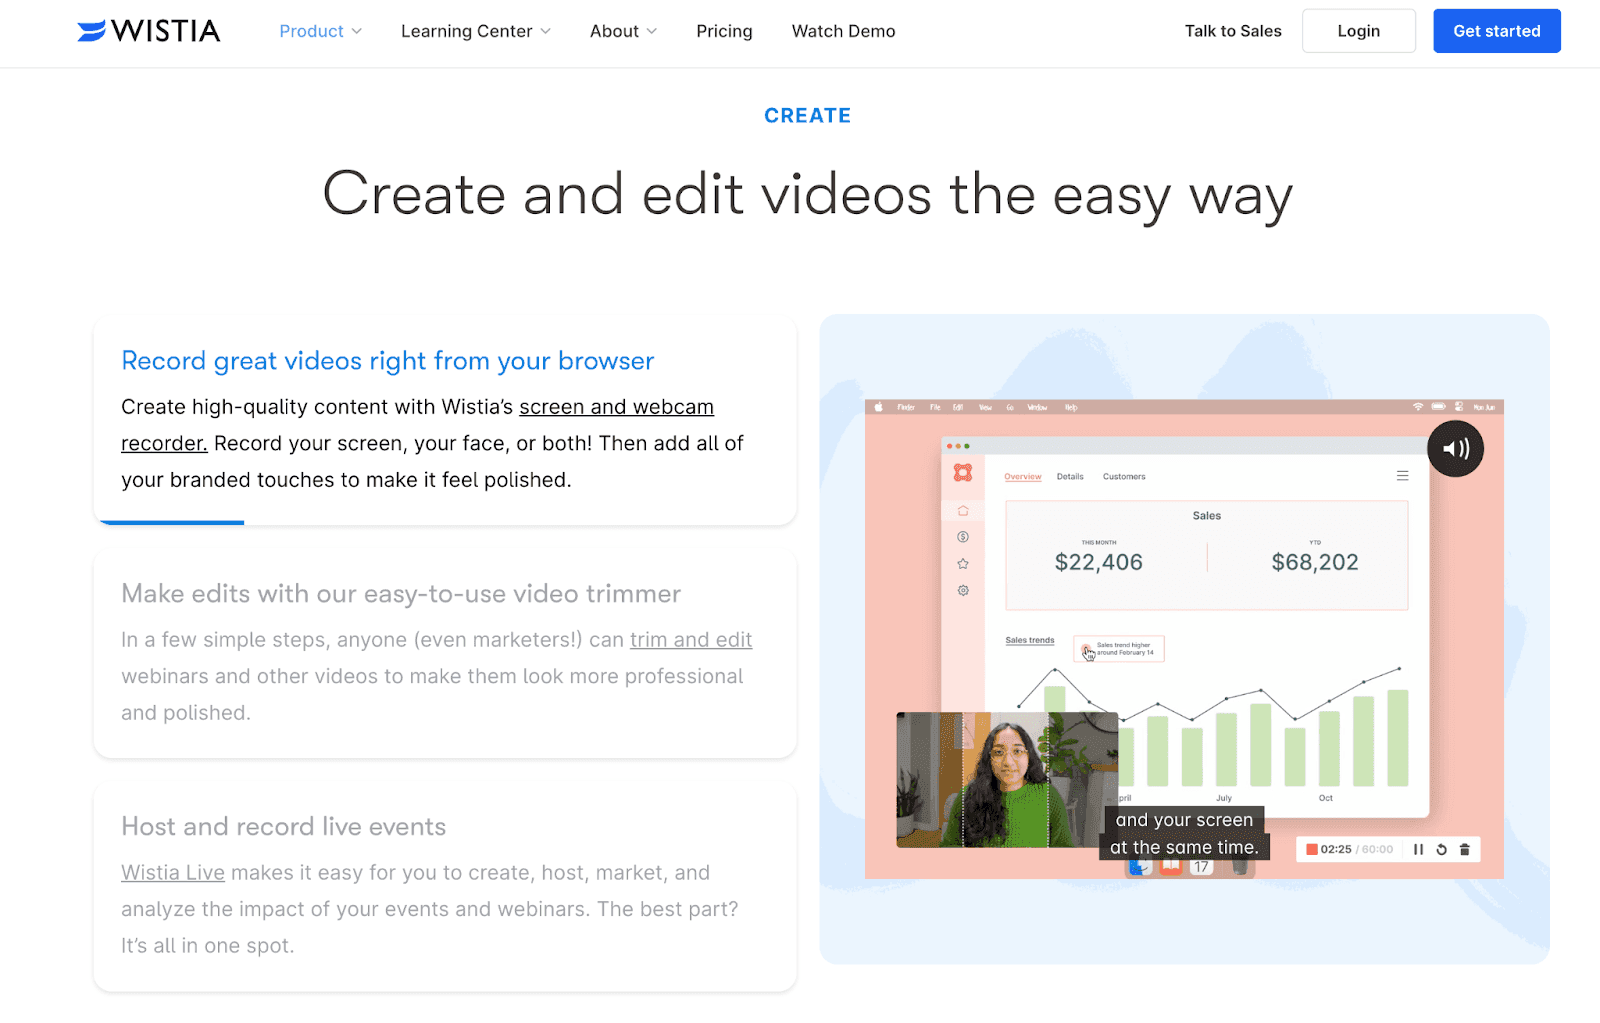 Wistia website - Create and edit videos the easy way